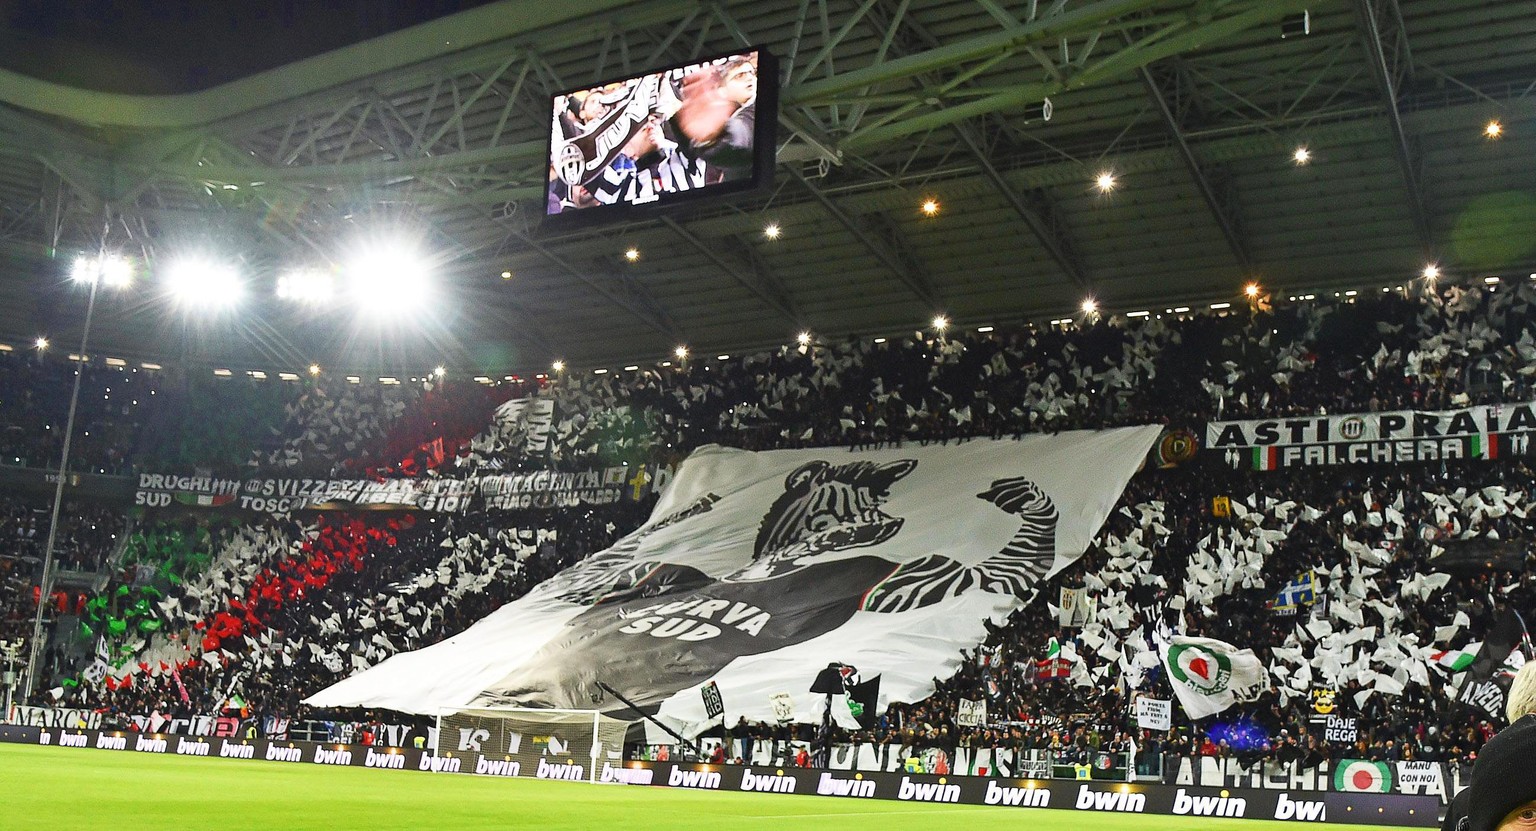 epa05036405 Juventus fans perform a choreography before the Italian Serie A soccer match between Juventus FC and AC Milan at Juventus Stadium in Turin, Italy, 21 November 2015. EPA/ANDREA DI MARCO